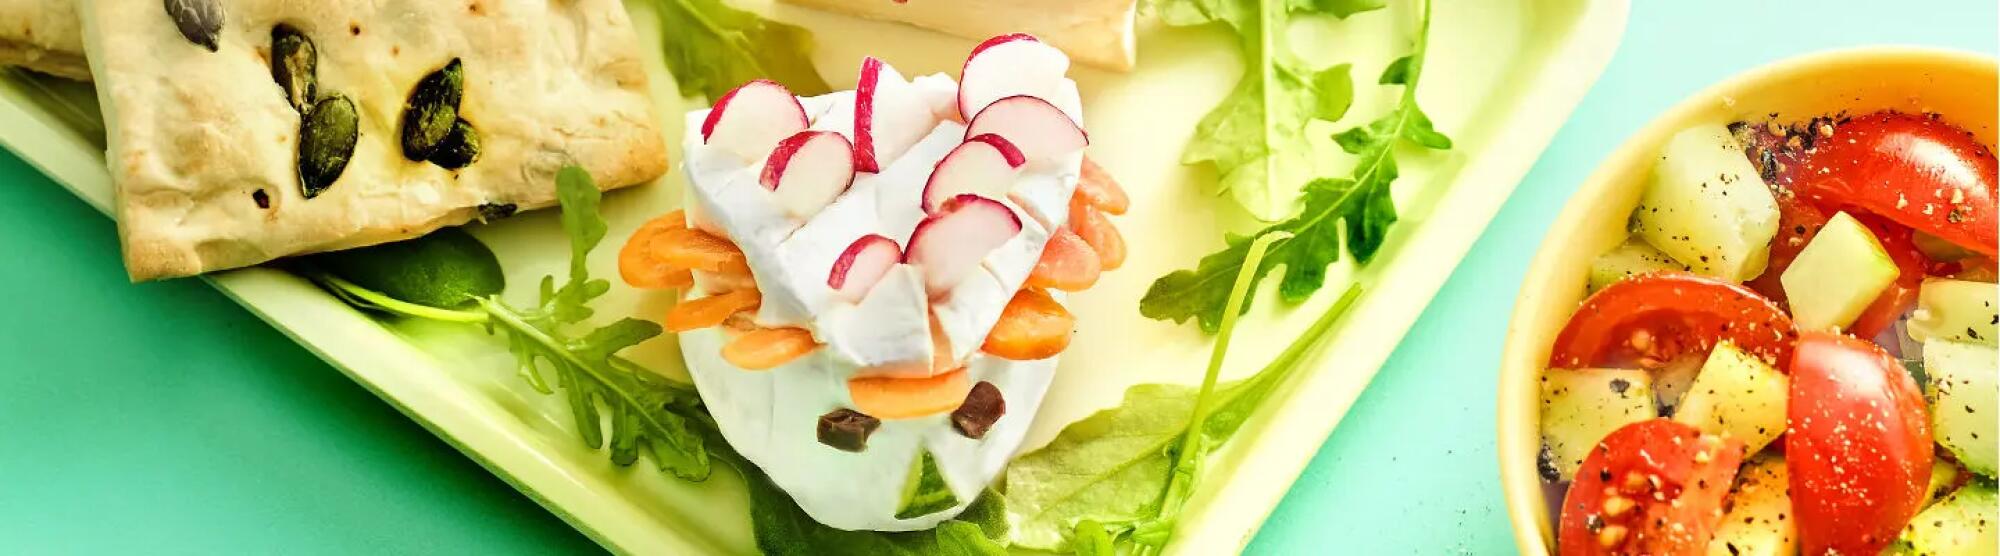 Recette : Mini fromage 